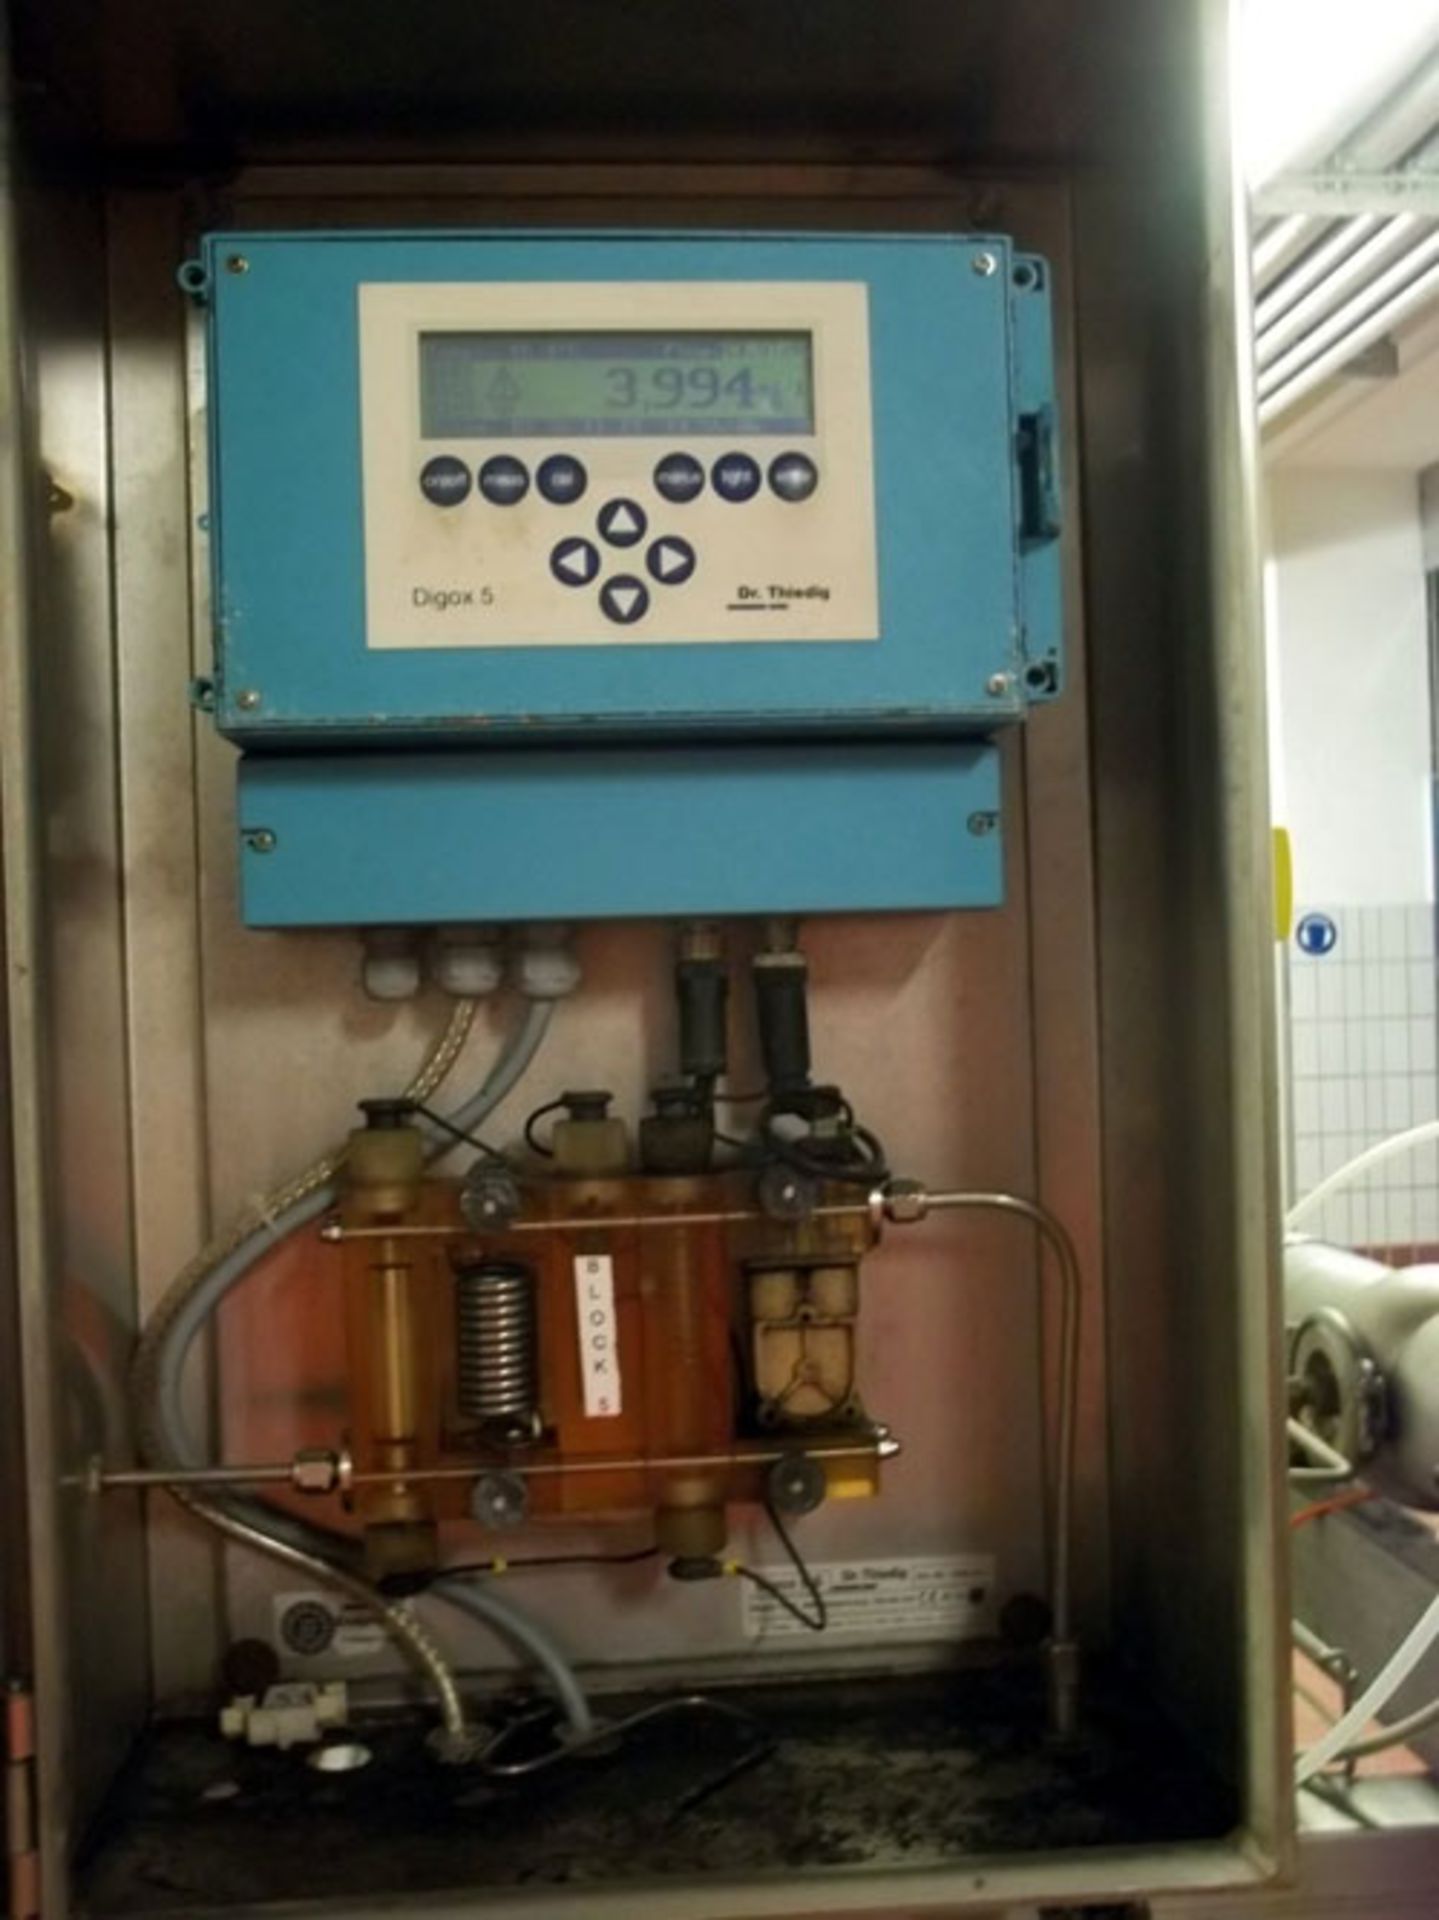 Flow Metering Skid Consisting Of: (6) Endress+Hauser flow meters, (1) panel, miscellaneous piping - Image 6 of 6